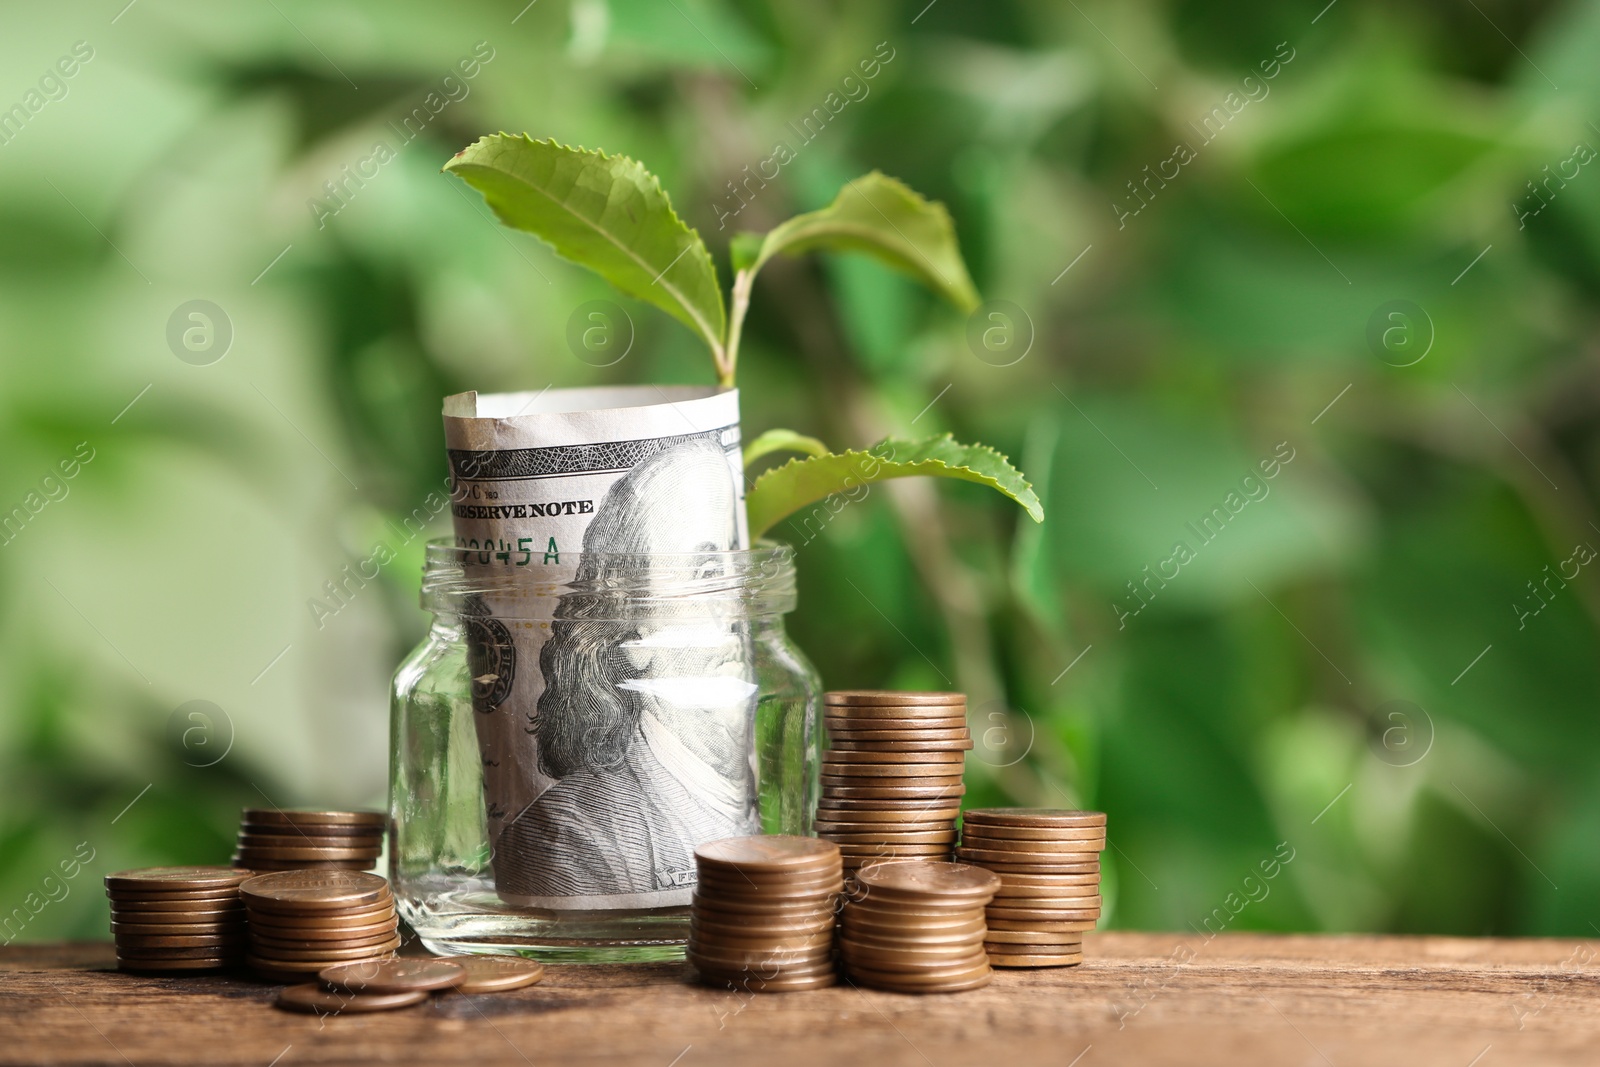 Photo of Money and sprout on wooden table against blurred background